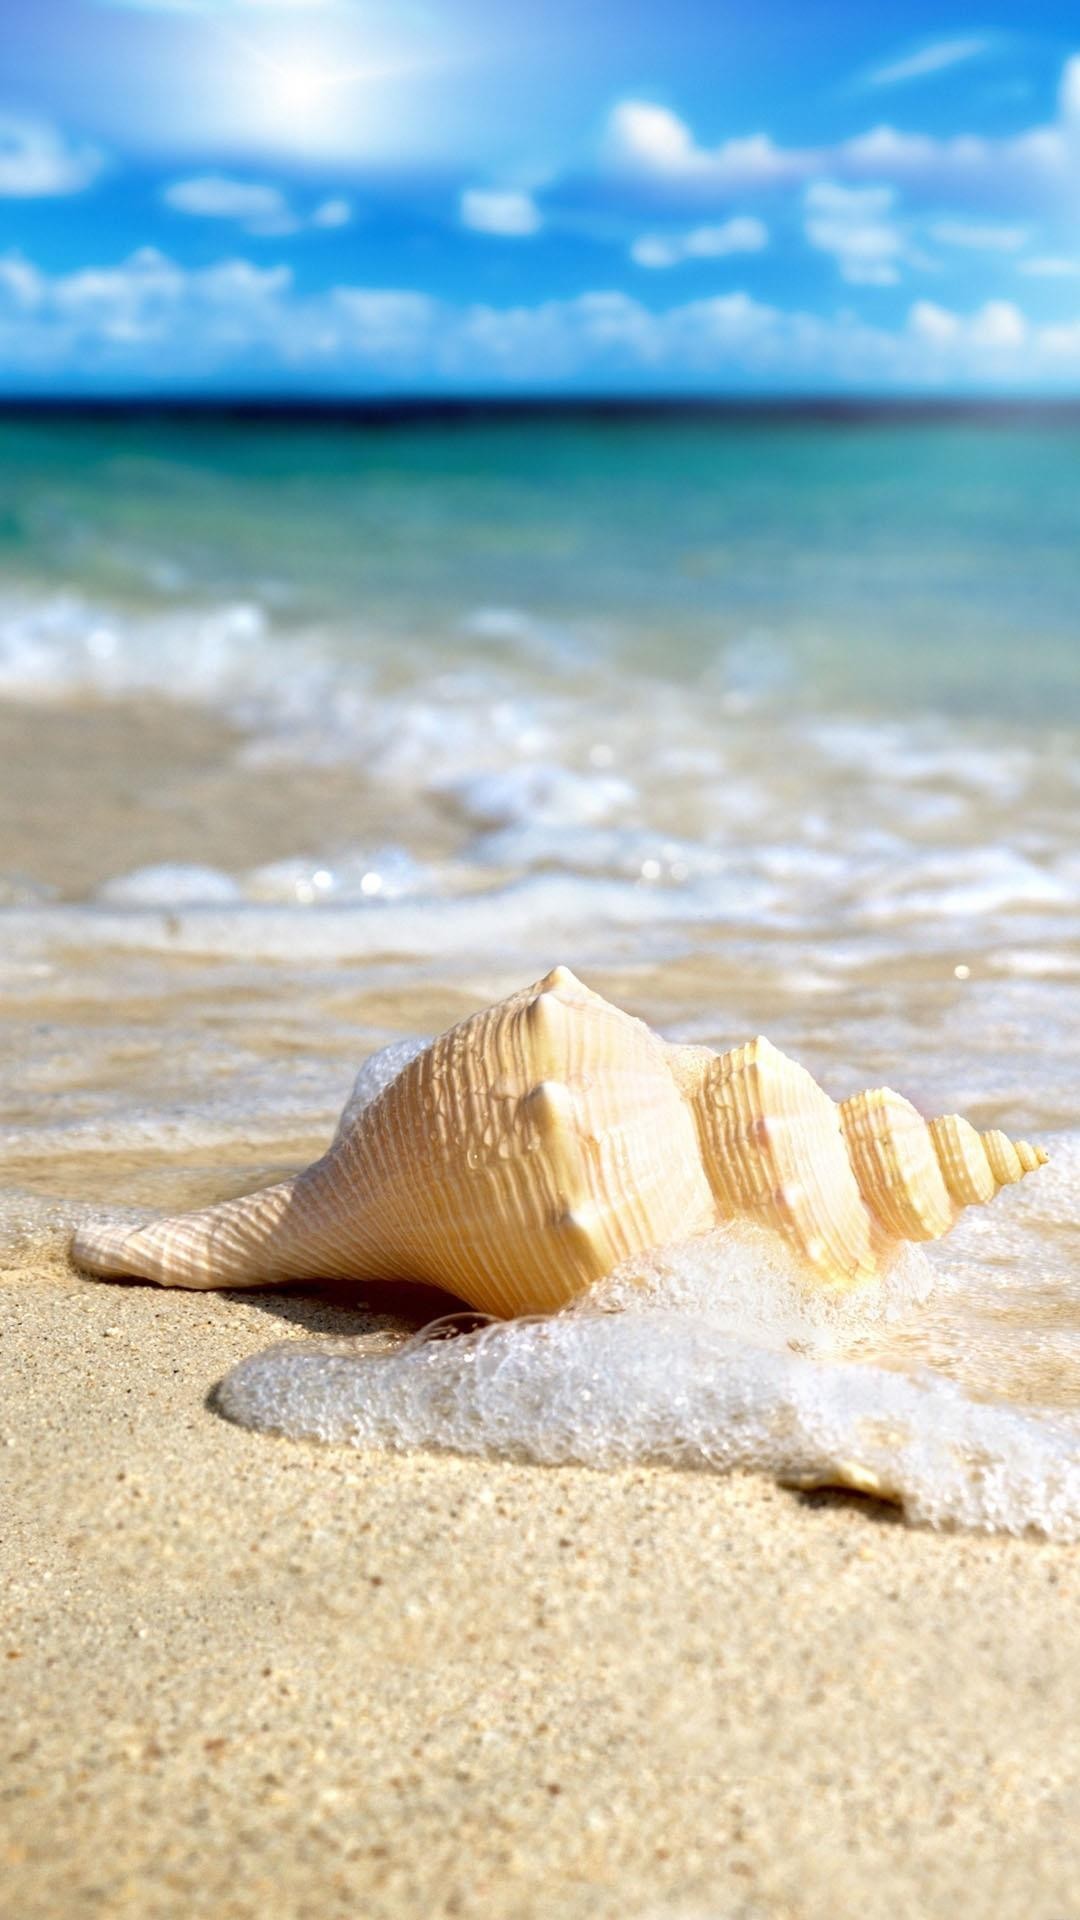 1080x1920 Seashell, nice beach, blue sky, just awesome. Tap to see more Nature